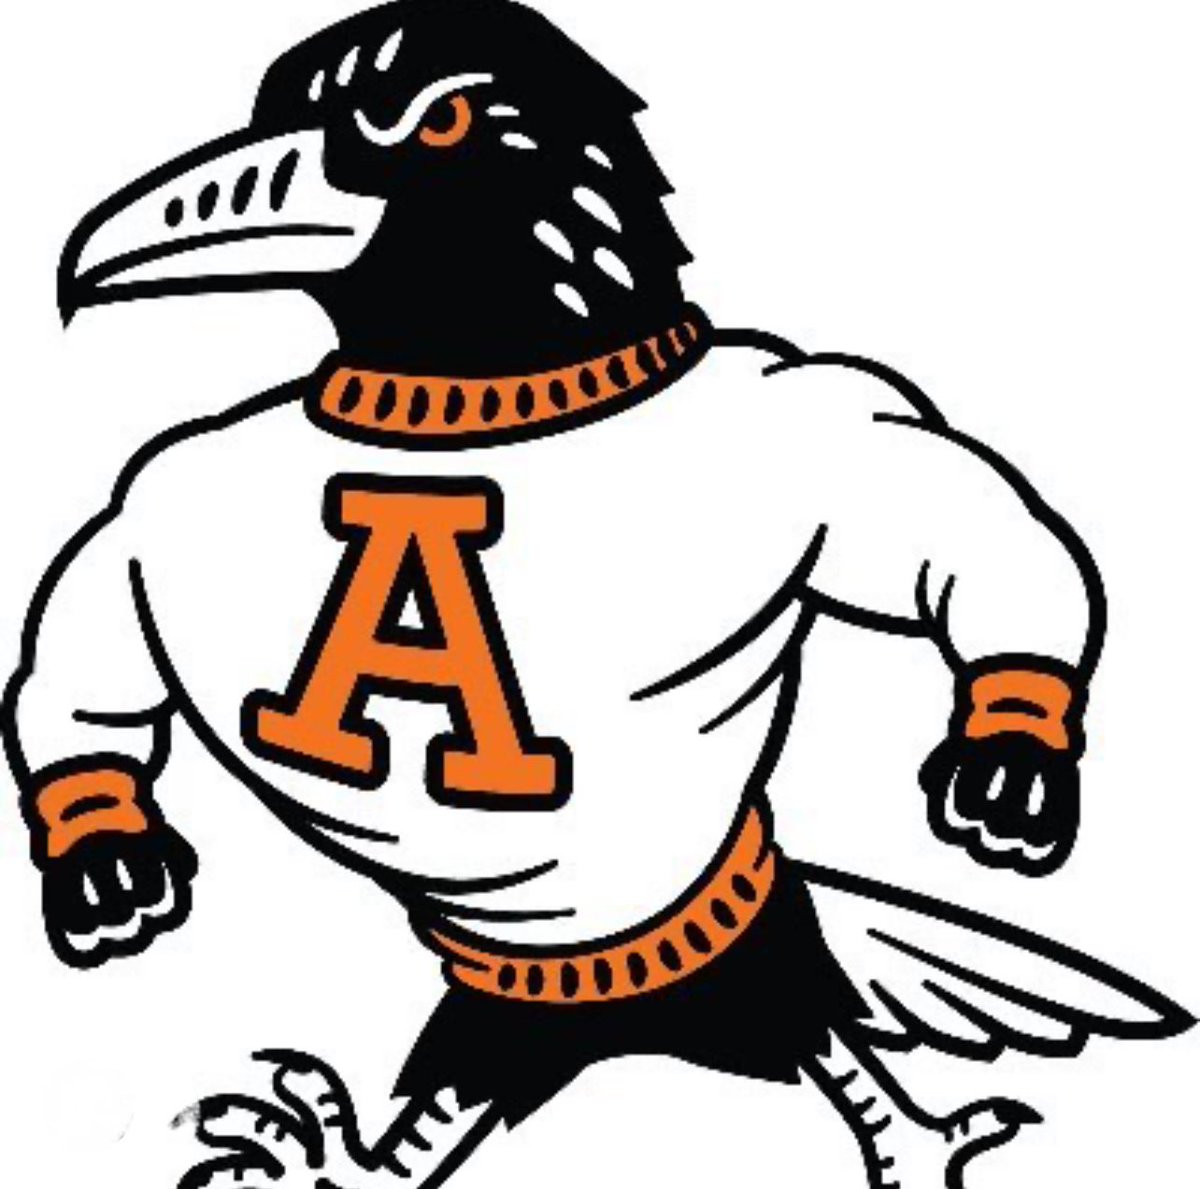 after a great talk with coach ashton, I am blessed to receive my first official offer from @AU_LaxIN #TheRavenWay